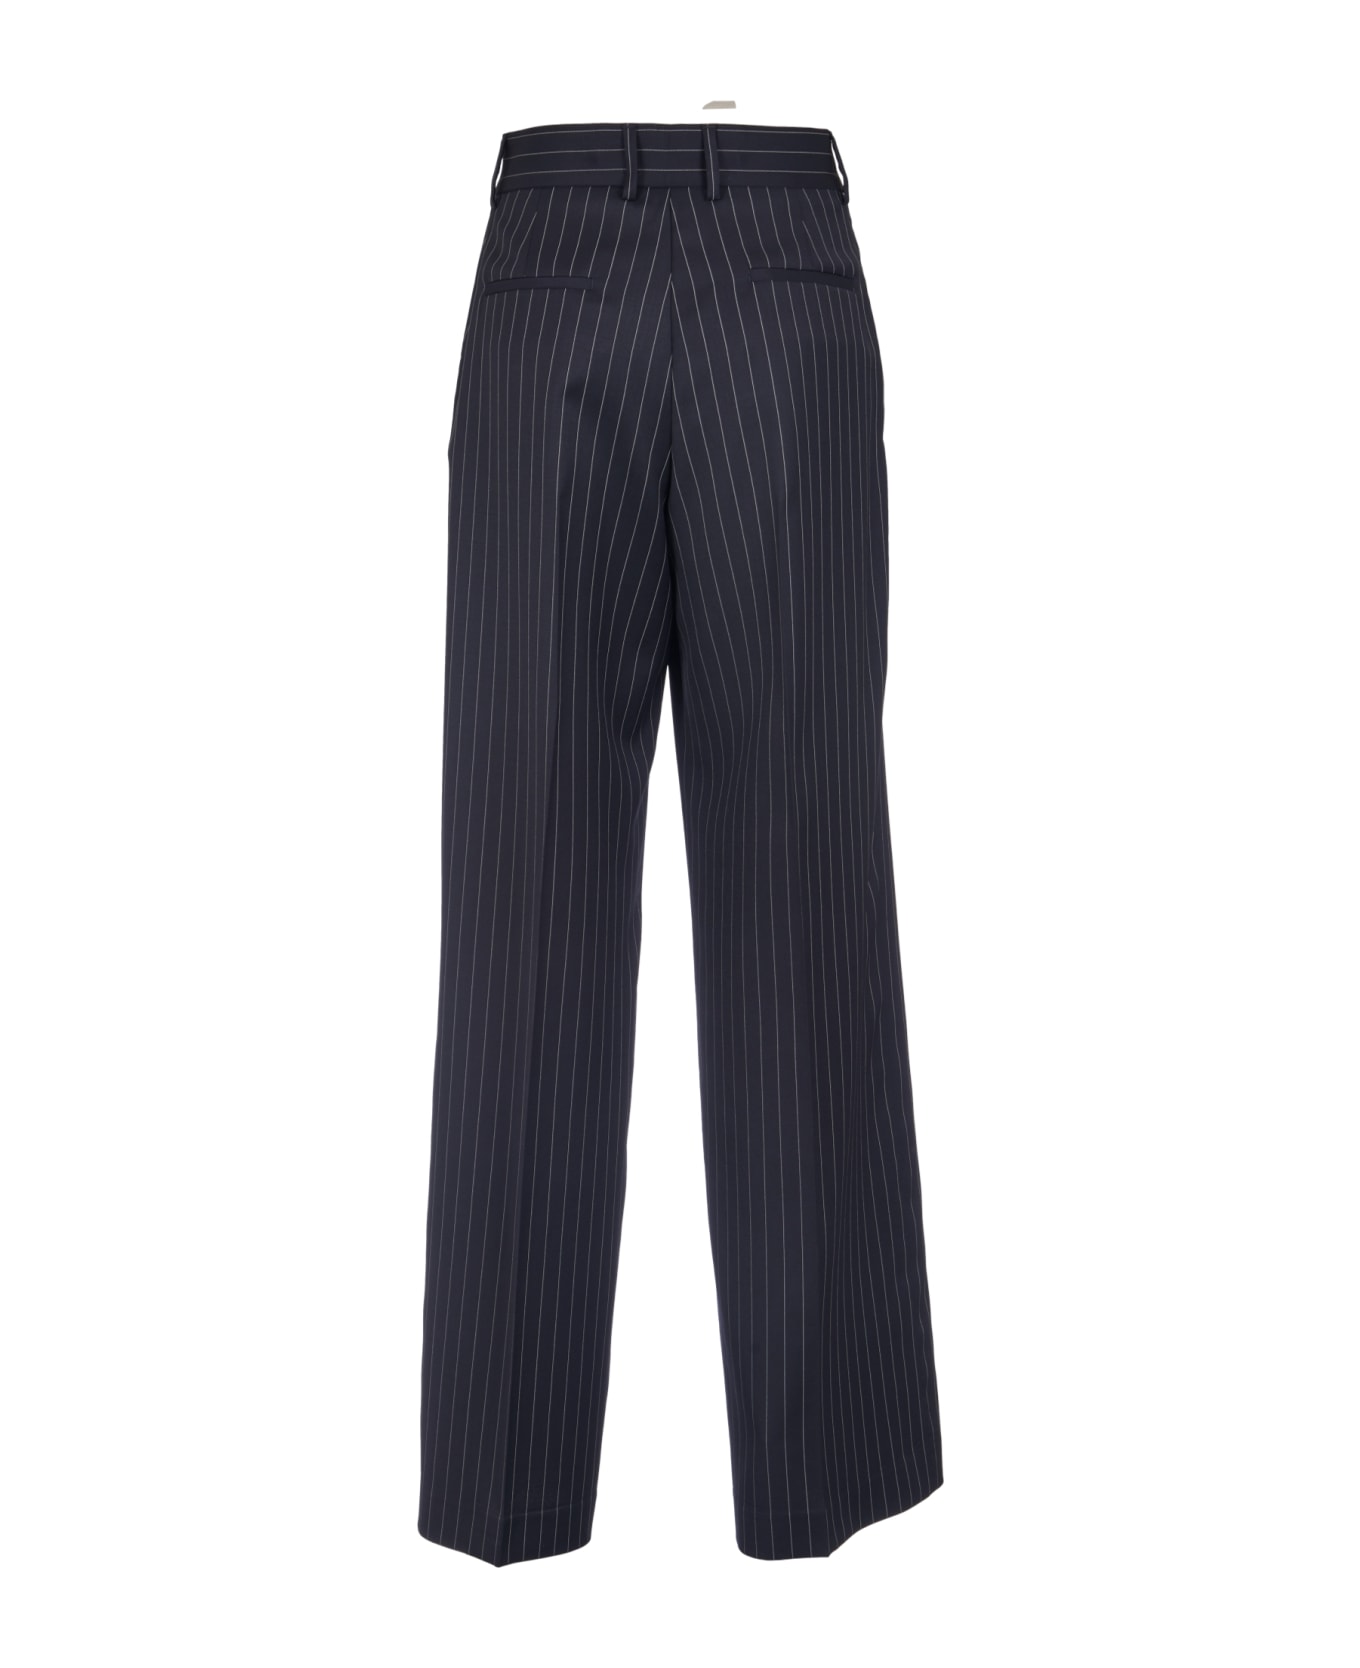 MSGM Pinstripe Trousers - Navy ボトムス